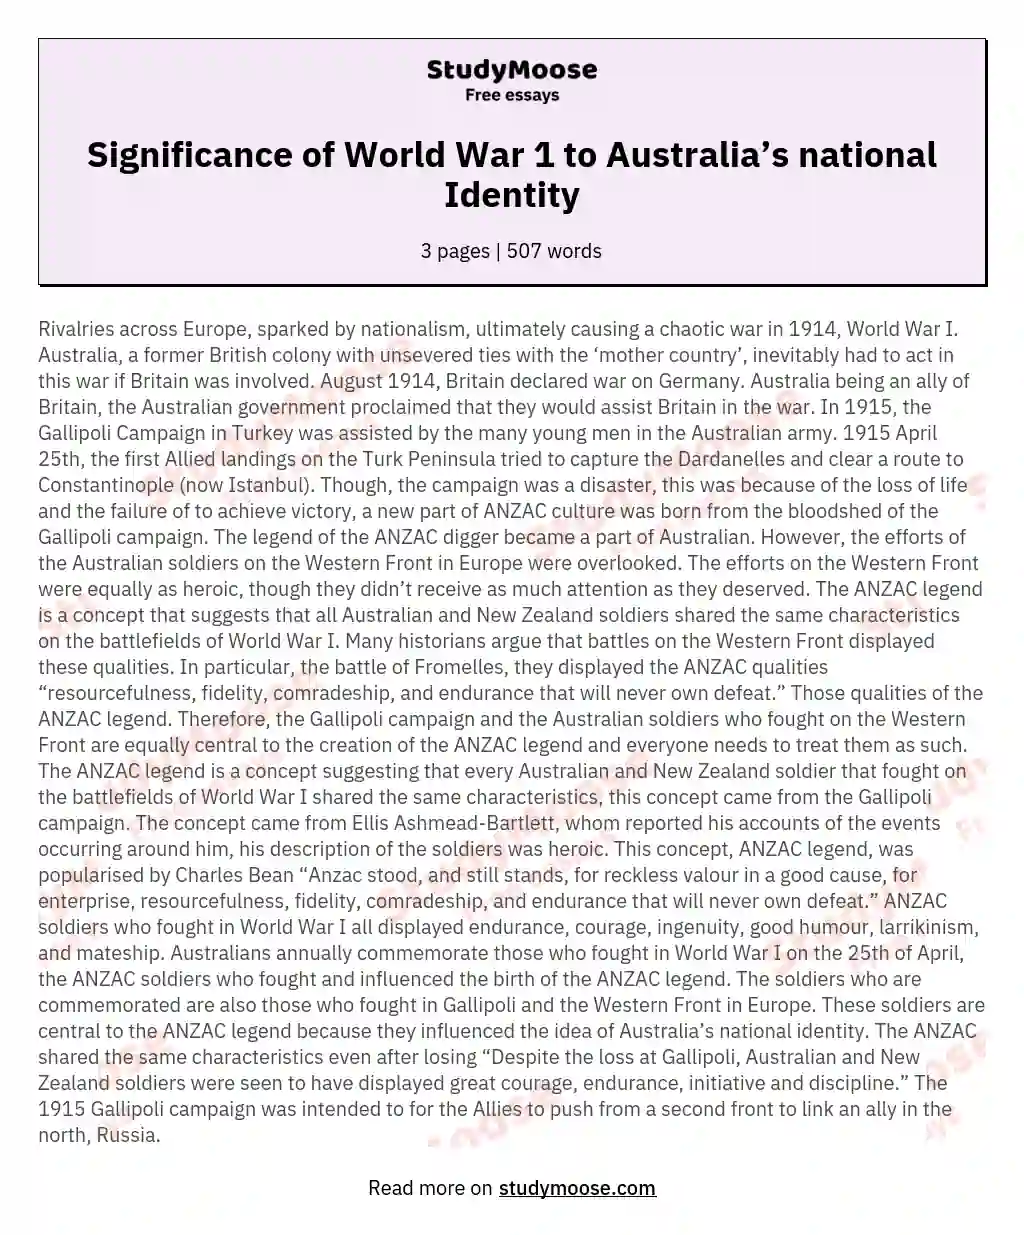 Significance of World War 1 to Australia’s national Identity essay